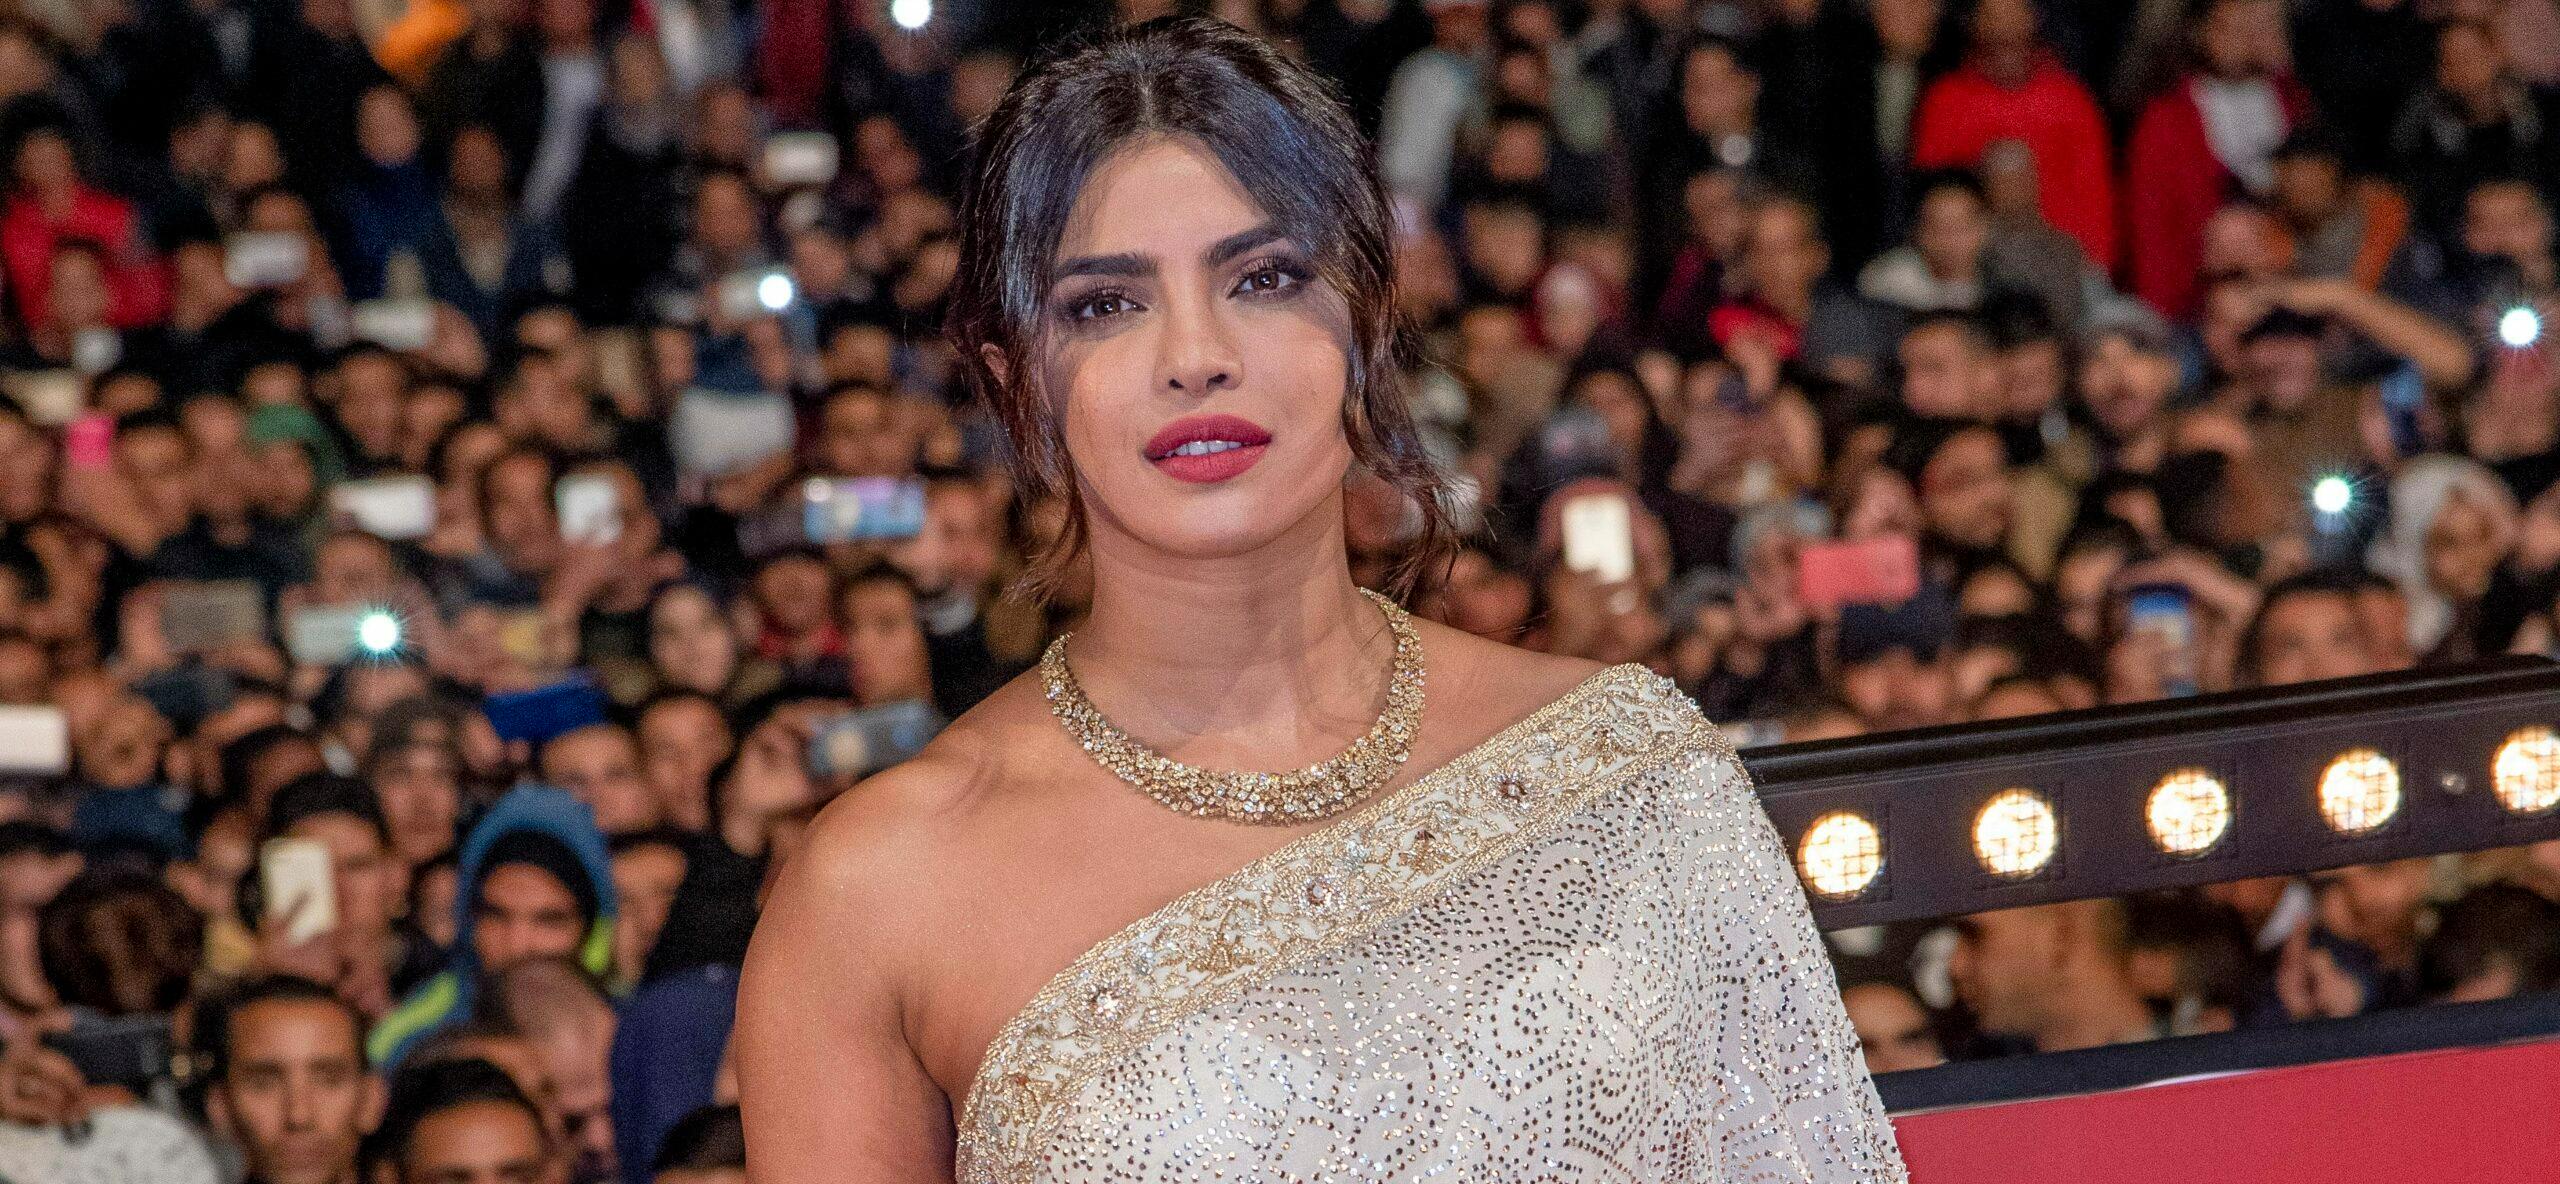 Priyanka Chopra Jonas Opens Up About Her Struggles With ‘Deep Depression’ After Botched Nose Job